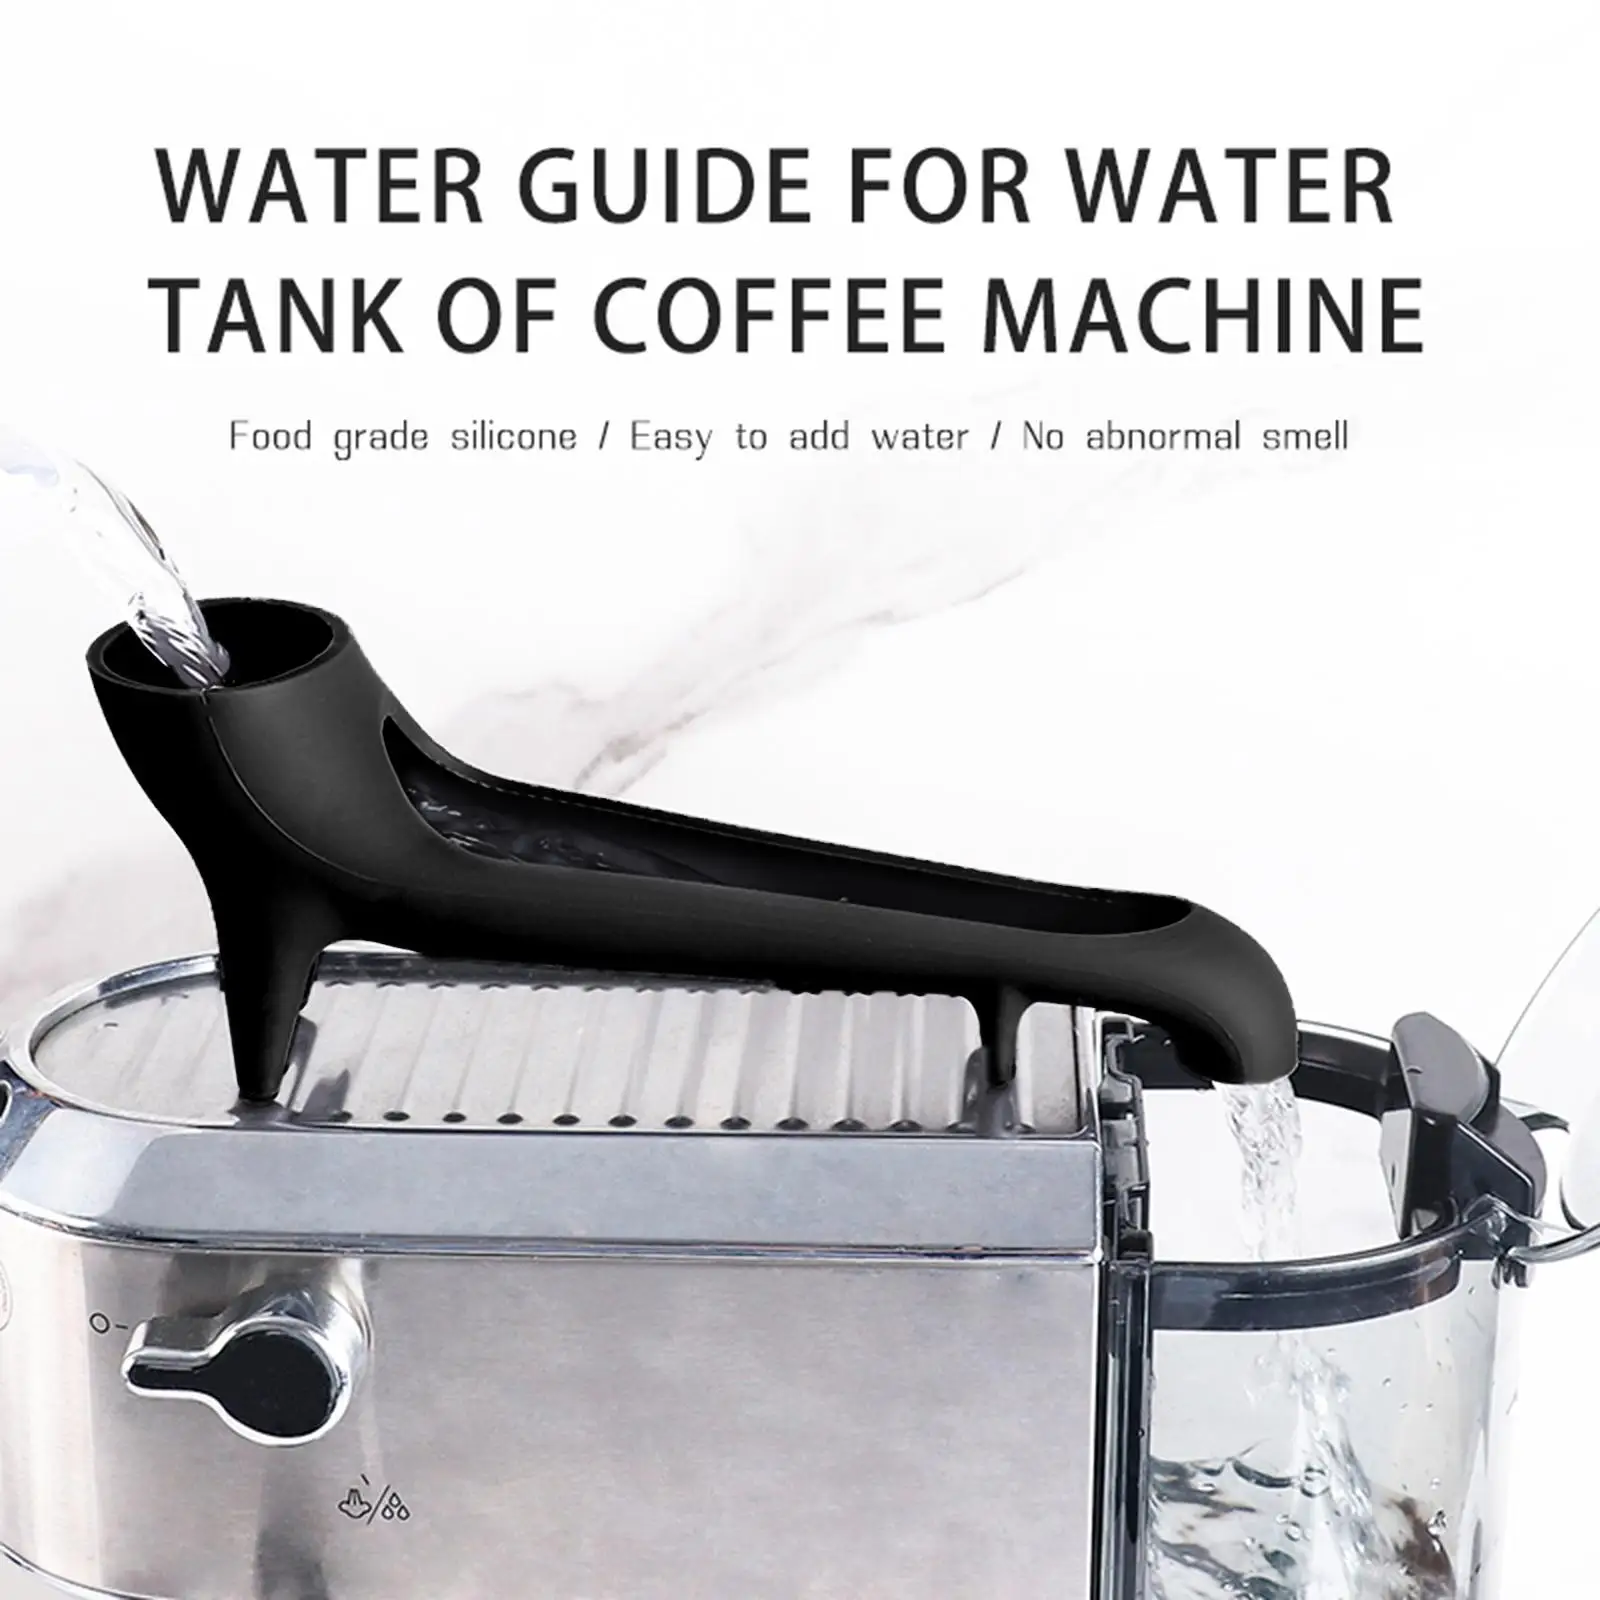 Coffee Machine Water Tank Water Guide Auxiliary Water Dispenser Diversion Tool Coffee Tampering and Water Tank